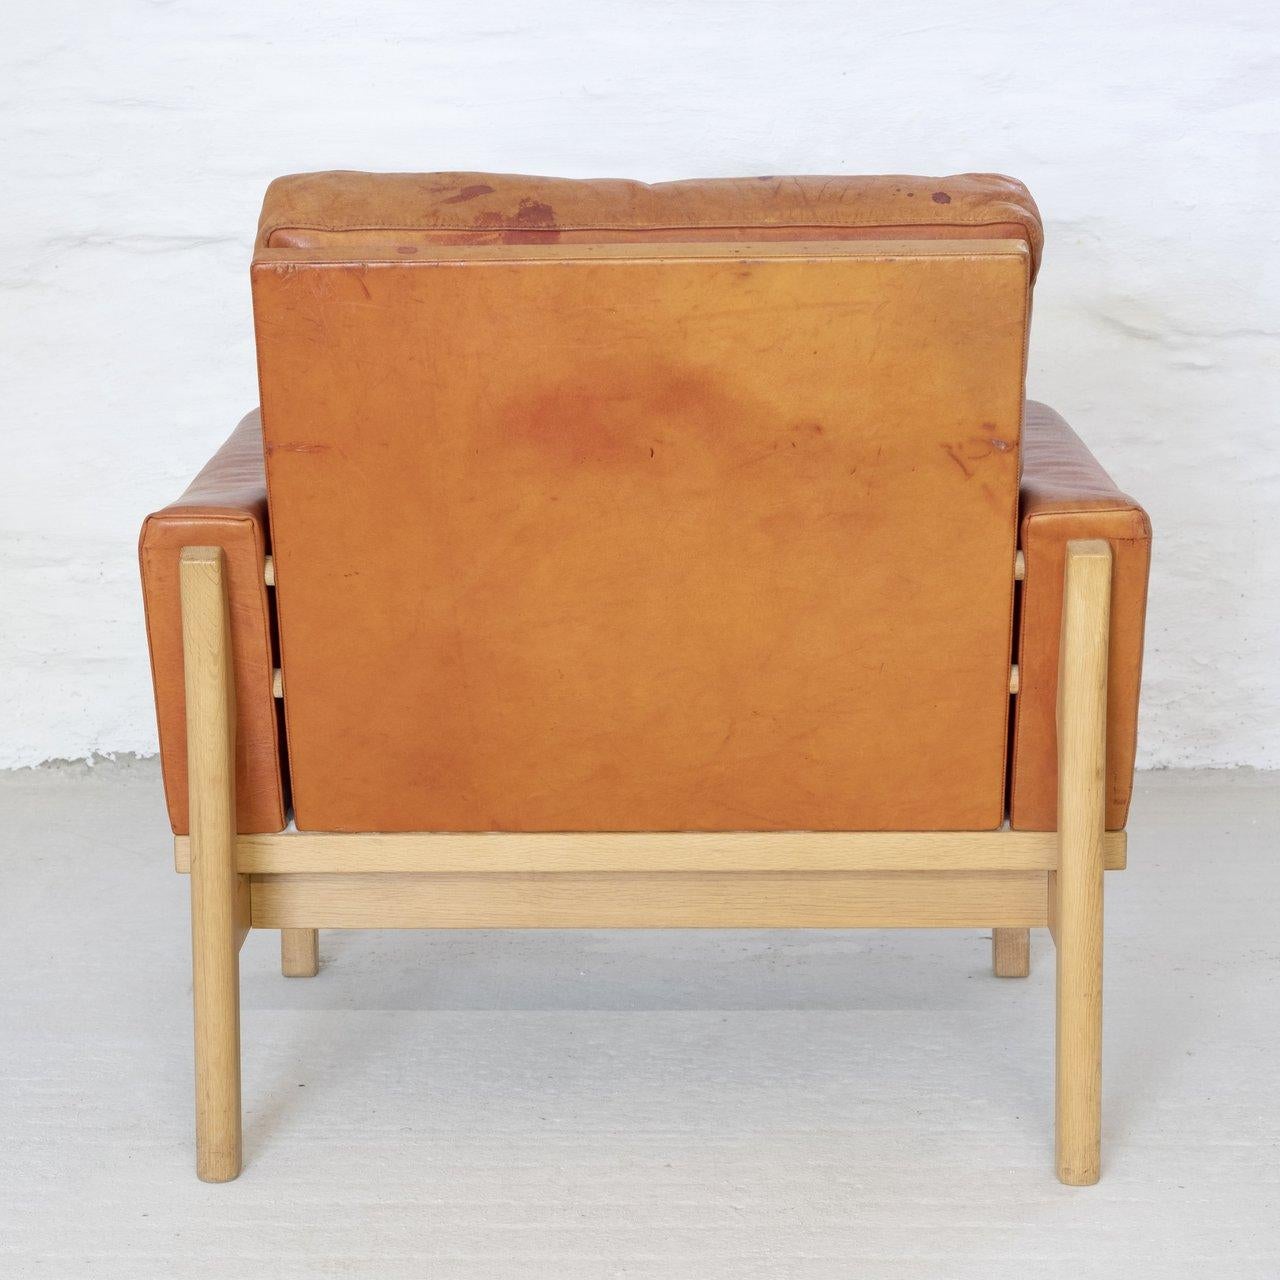 Mid-20th Century Poul Volther Lounge Chair by Erik Jørgensen, 1960s Denmark For Sale